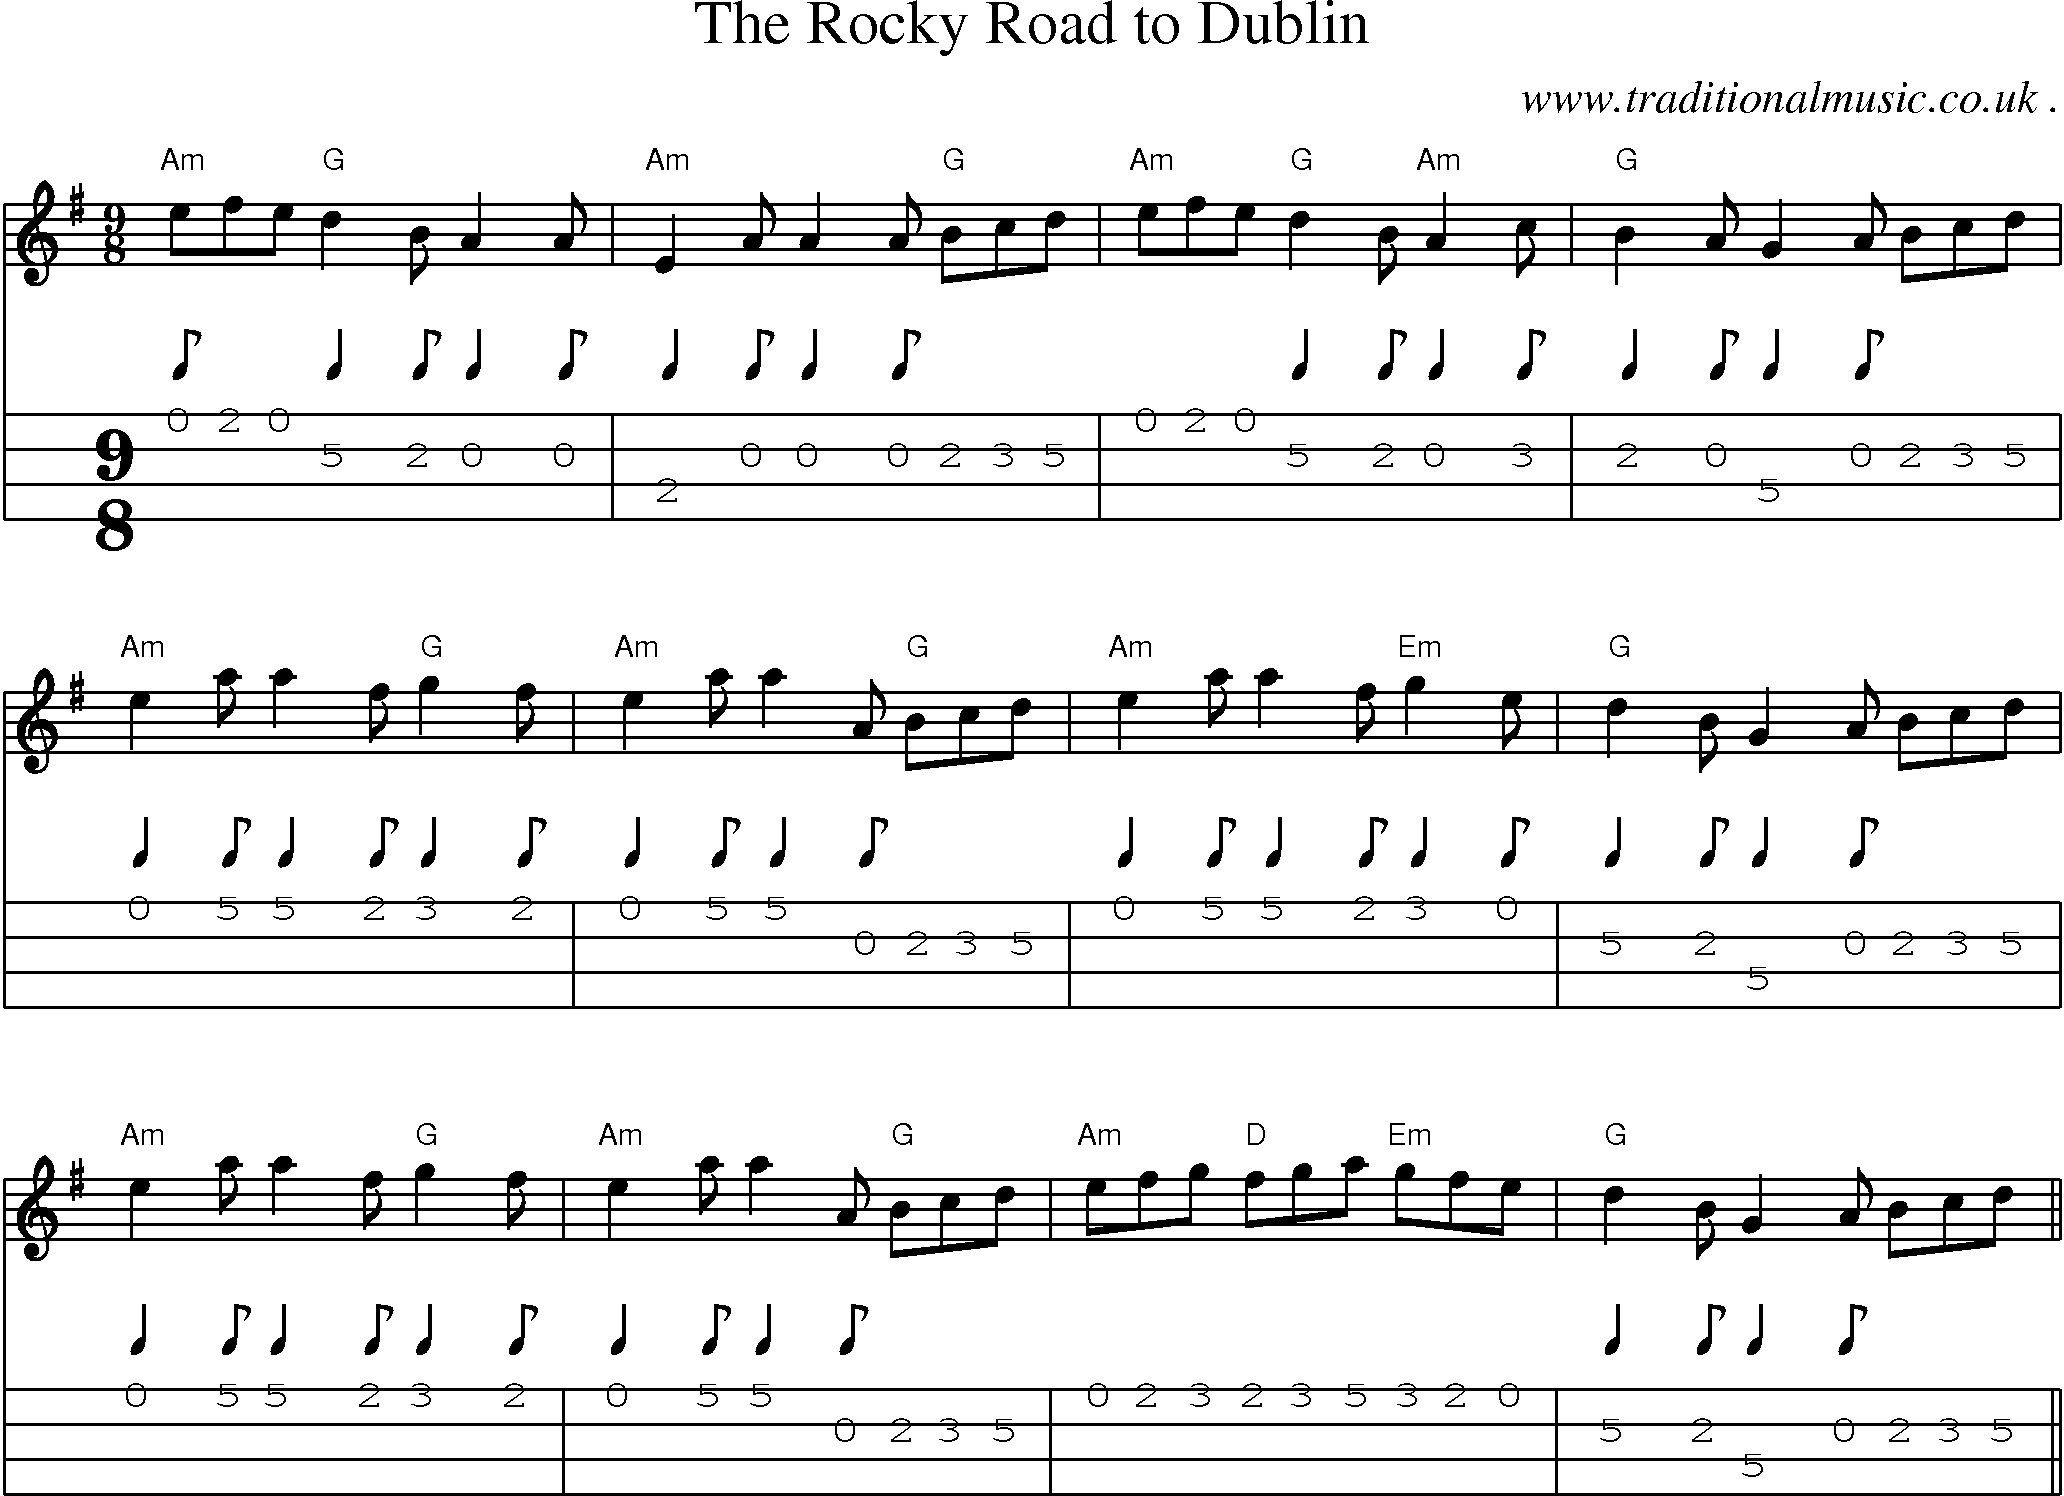 Music Score and Guitar Tabs for The Rocky Road To Dublin